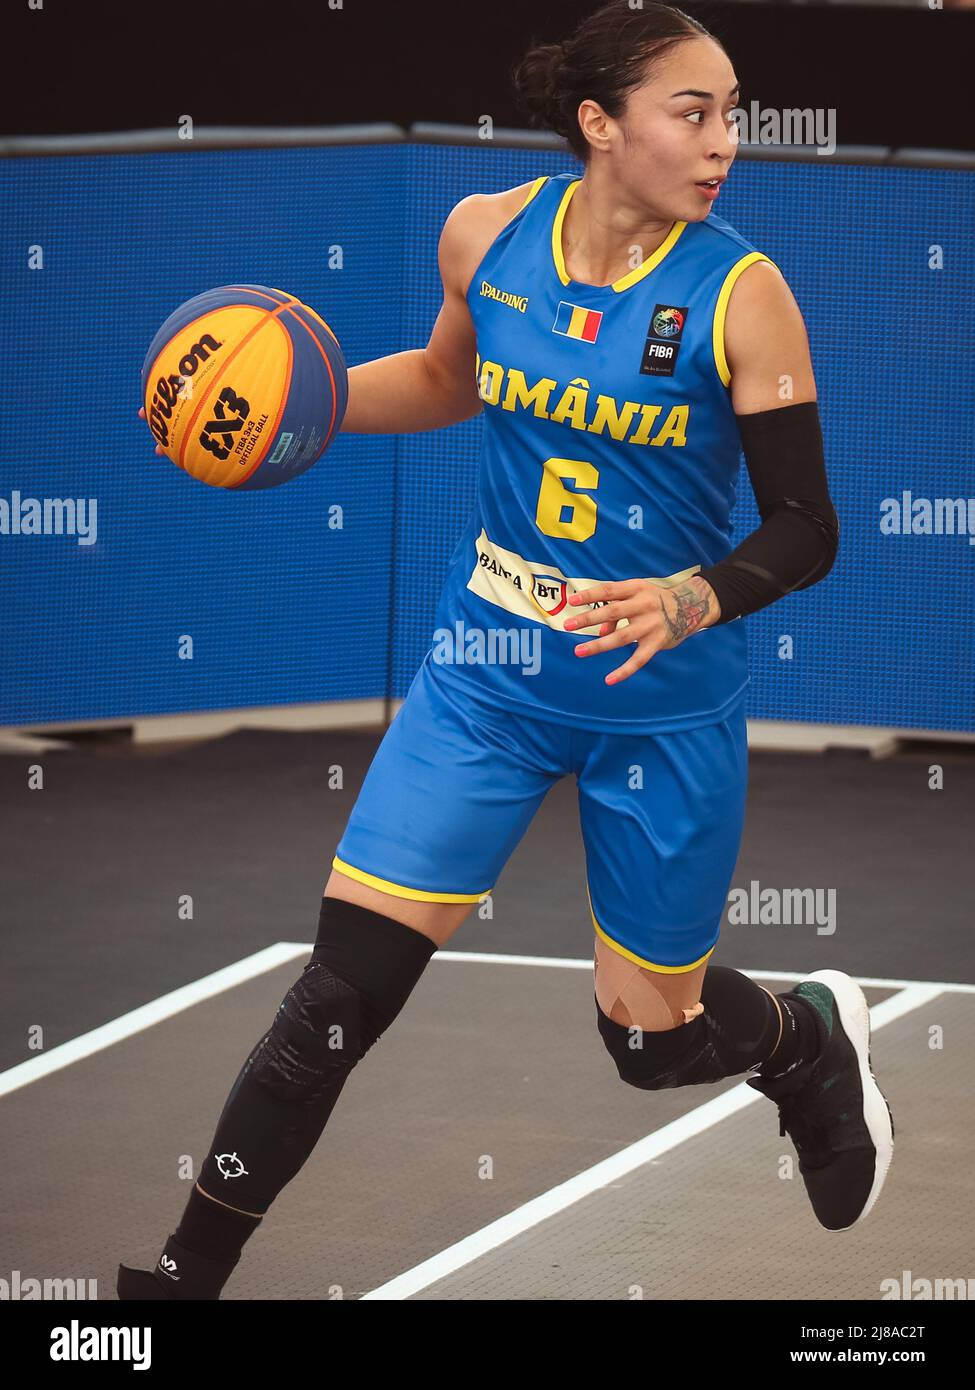 Amsterdam, Netherlands, June 18, 2019:Romanian female basketball player Sonia Ursu in action during the FIBA basketball 3x3 world cup Stock Photo